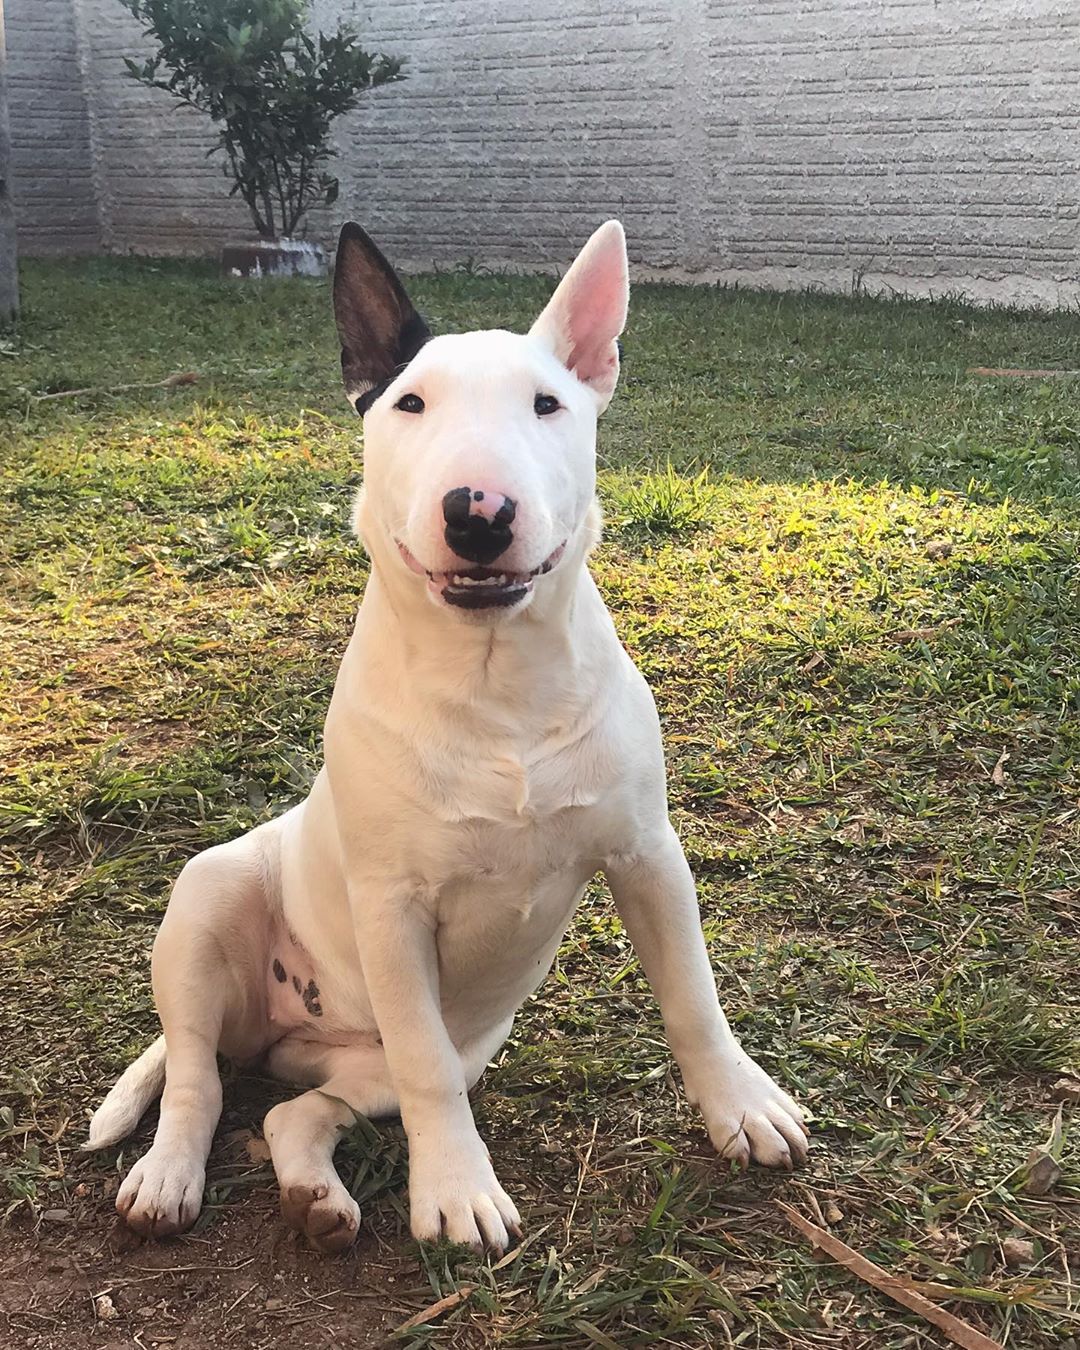 A Bull Terrier sitting on the grass in the yard